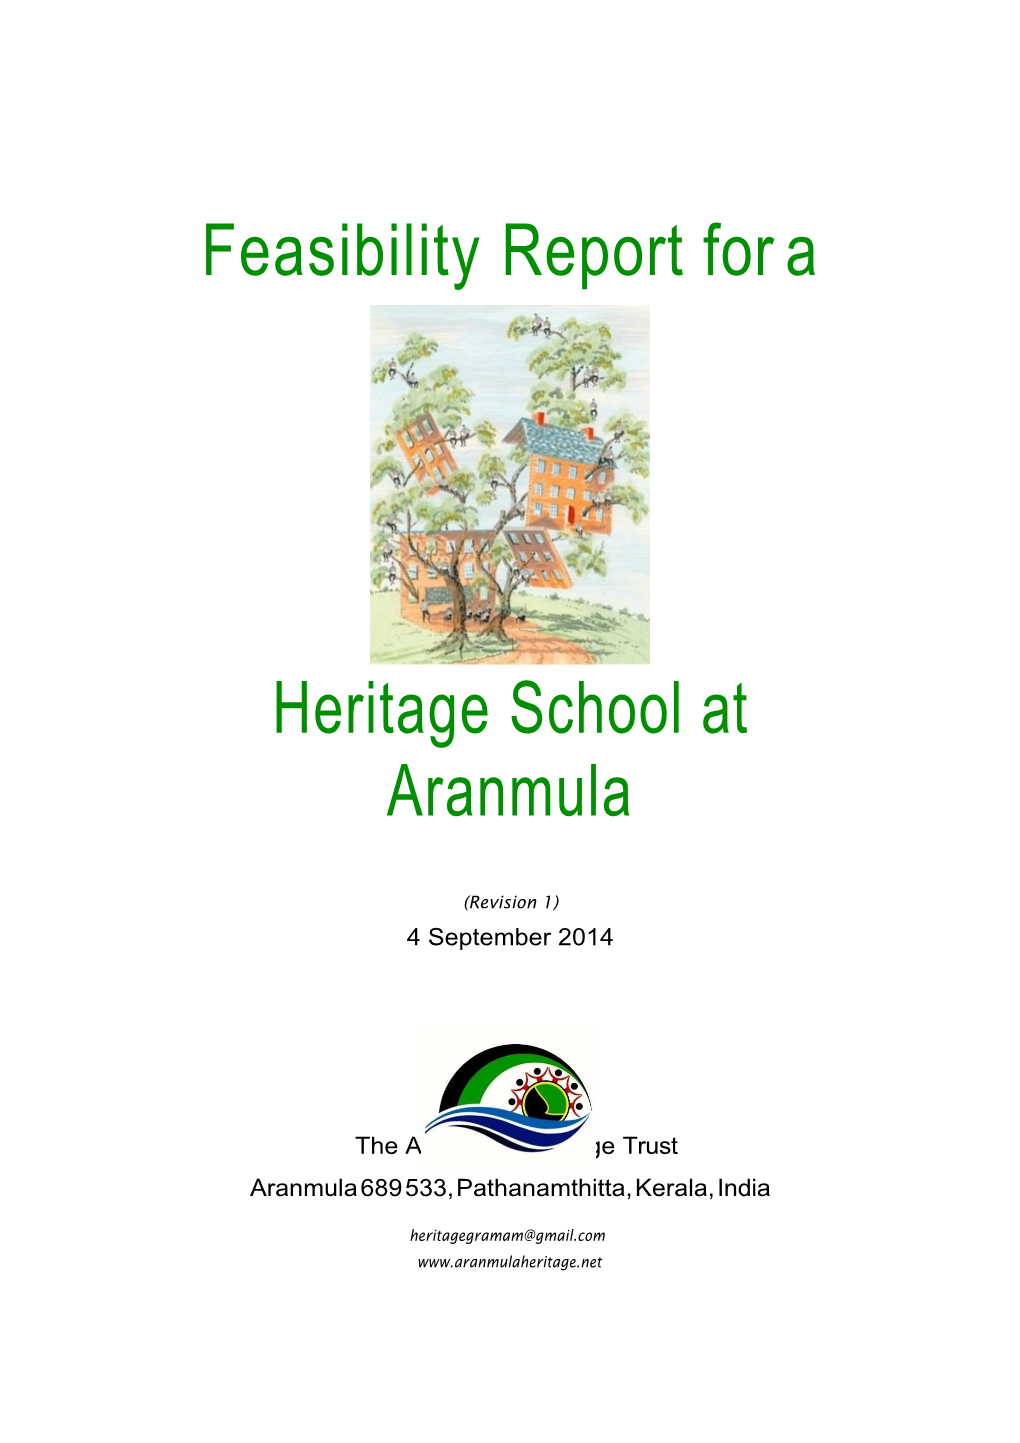 Feasibility Report for a Heritage School at Aranmula (Revision 1) 4 September 2014